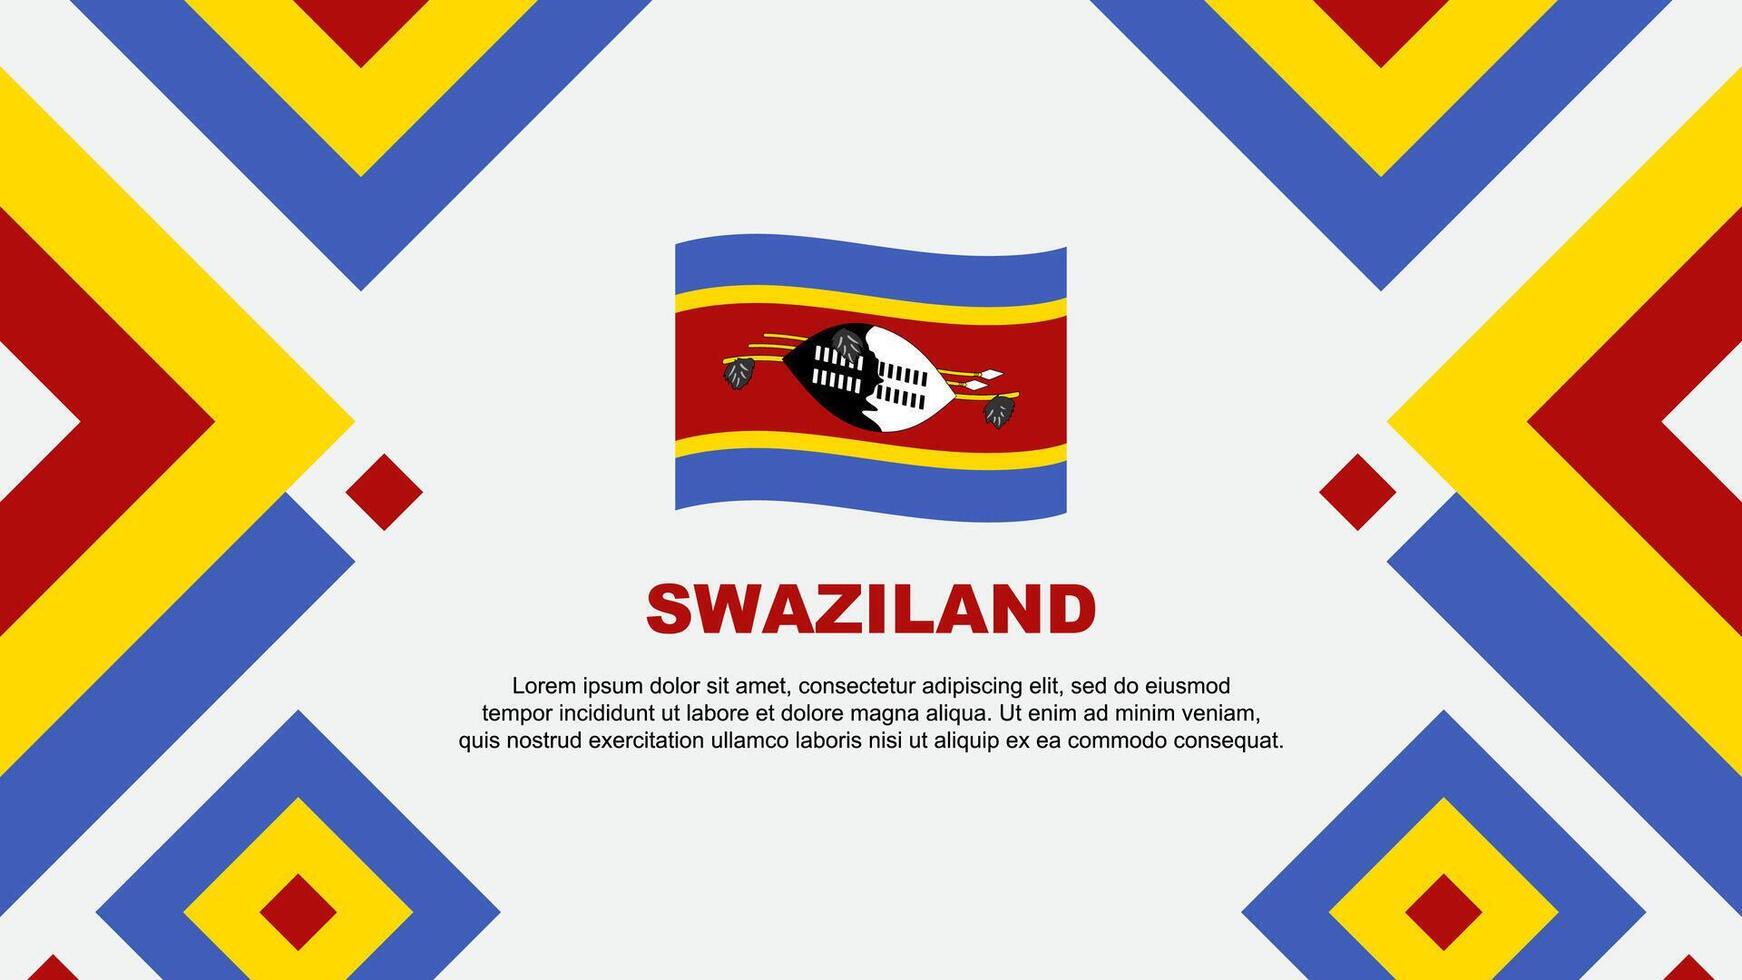 Swaziland Flag Abstract Background Design Template. Swaziland Independence Day Banner Wallpaper Vector Illustration. Swaziland Template